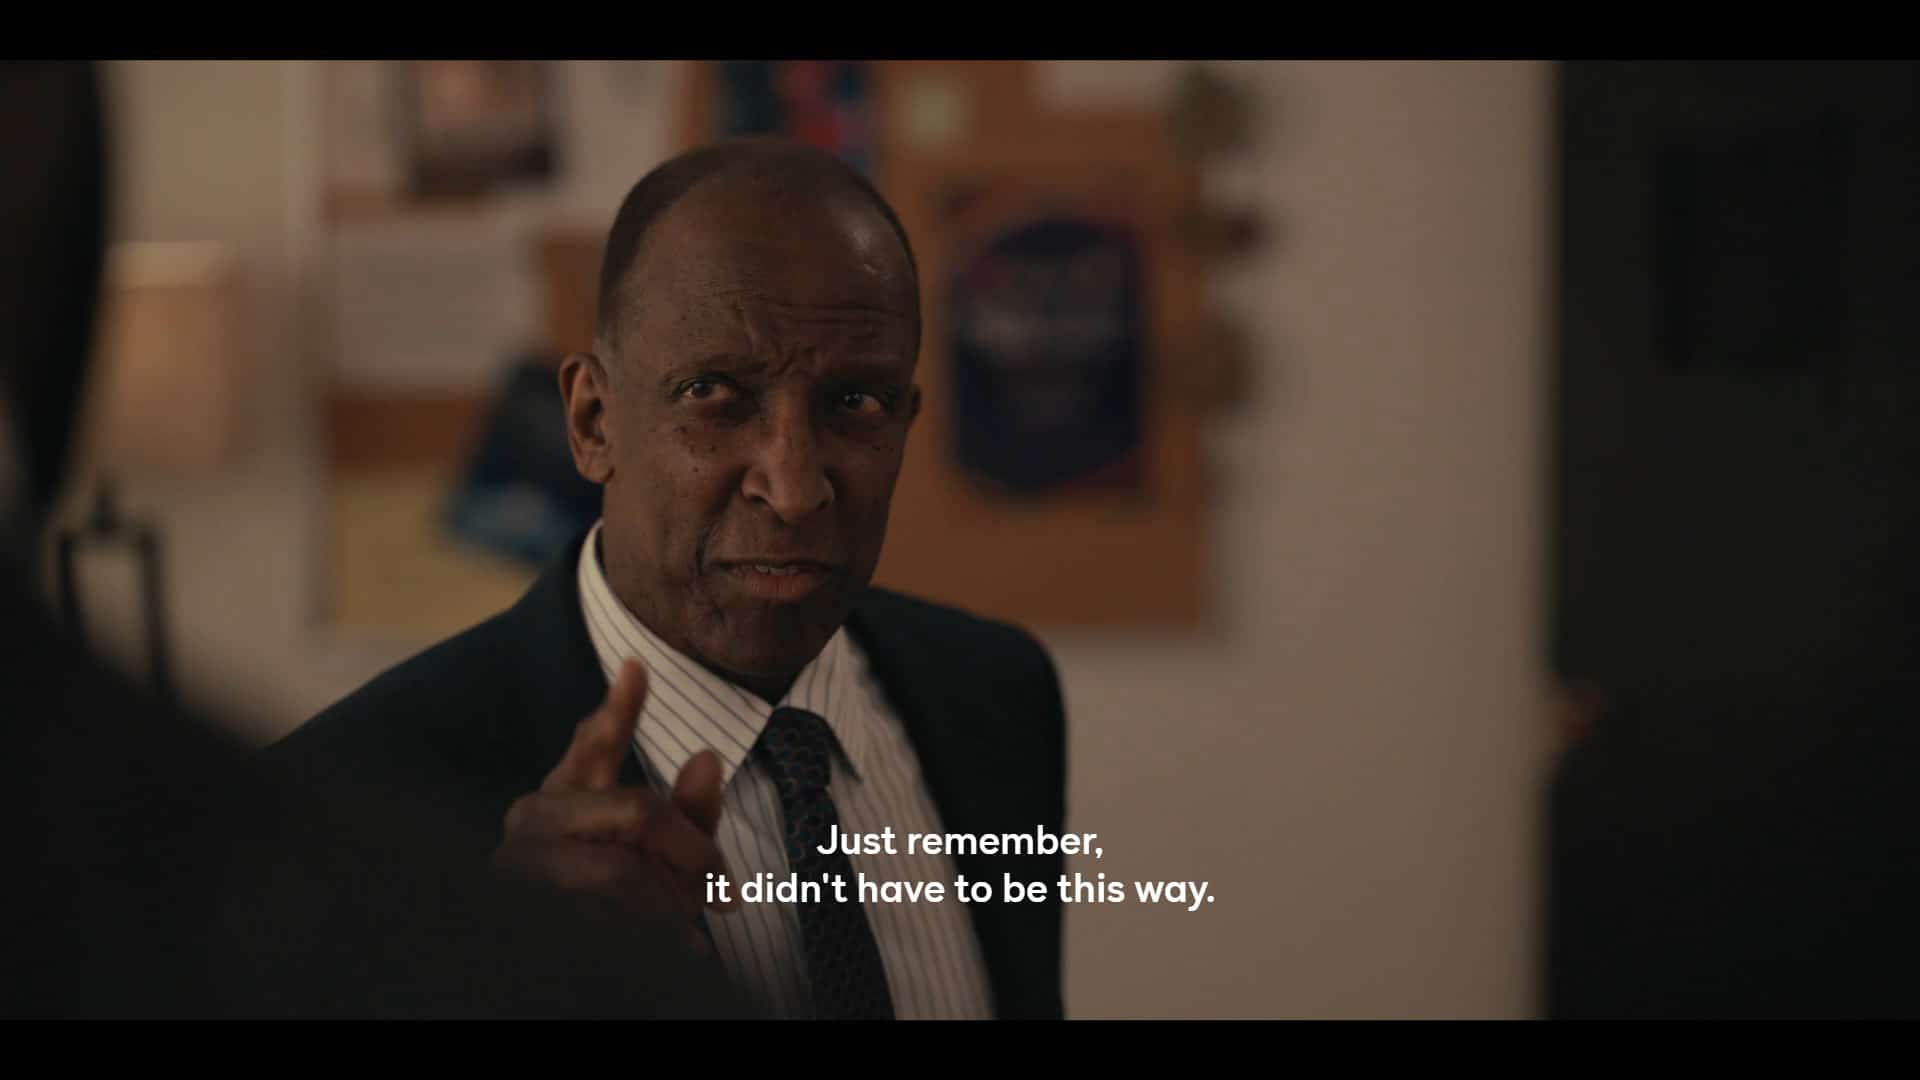 Judge Robertson (Dorian Harewood) noting things didn't have to be this way